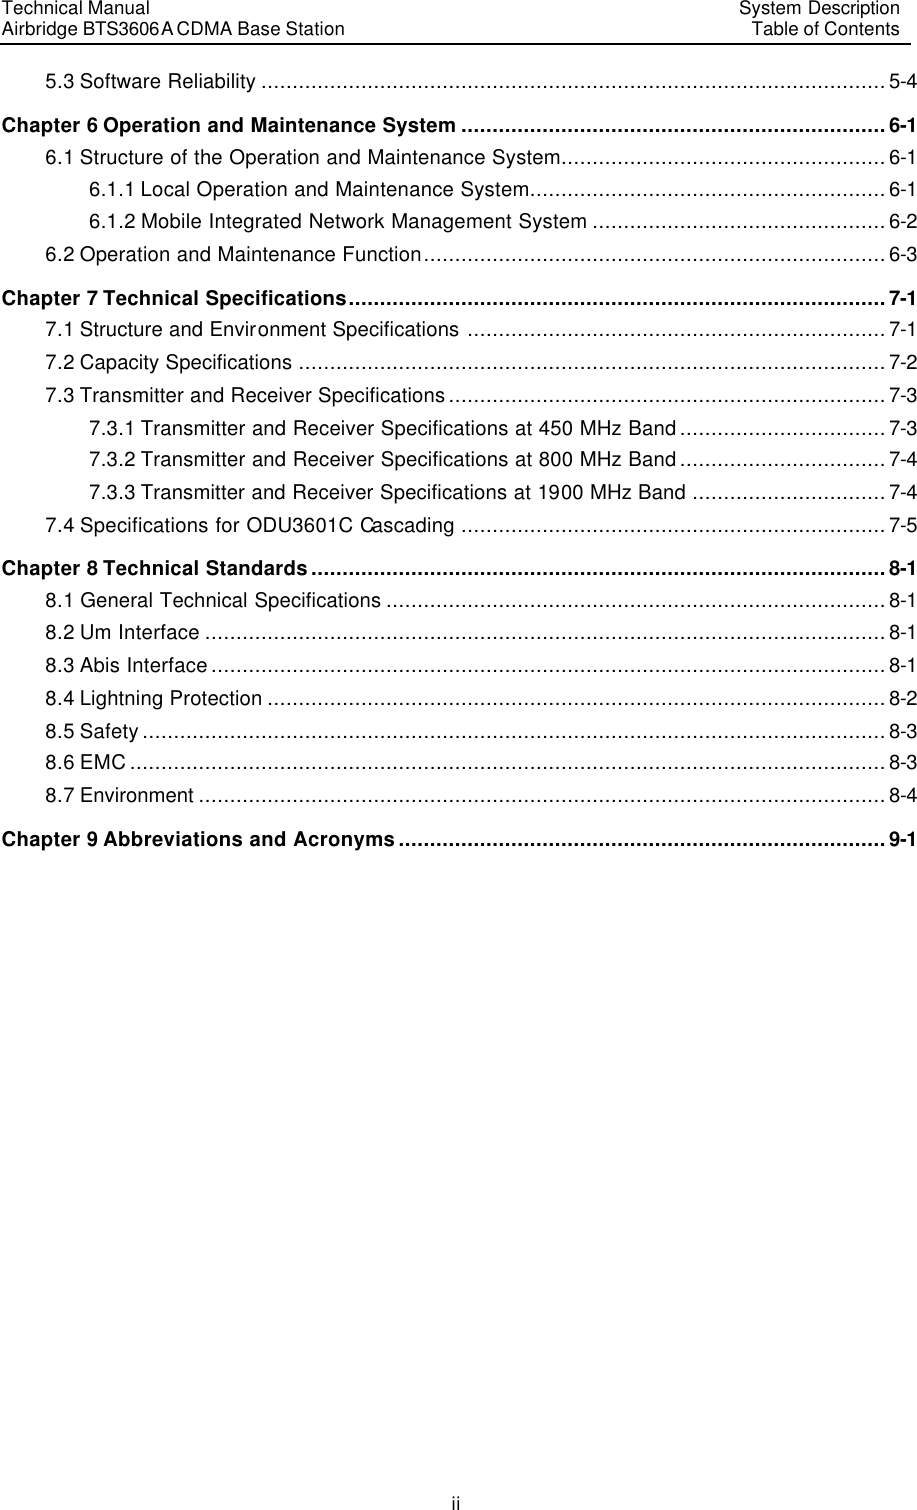 Technical Manual Airbridge BTS3606A CDMA Base Station System Description Table of Contents  ii 5.3 Software Reliability ....................................................................................................5-4 Chapter 6 Operation and Maintenance System ....................................................................6-1 6.1 Structure of the Operation and Maintenance System....................................................6-1 6.1.1 Local Operation and Maintenance System.........................................................6-1 6.1.2 Mobile Integrated Network Management System ...............................................6-2 6.2 Operation and Maintenance Function..........................................................................6-3 Chapter 7 Technical Specifications......................................................................................7-1 7.1 Structure and Environment Specifications ...................................................................7-1 7.2 Capacity Specifications ..............................................................................................7-2 7.3 Transmitter and Receiver Specifications......................................................................7-3 7.3.1 Transmitter and Receiver Specifications at 450 MHz Band.................................7-3 7.3.2 Transmitter and Receiver Specifications at 800 MHz Band.................................7-4 7.3.3 Transmitter and Receiver Specifications at 1900 MHz Band ...............................7-4 7.4 Specifications for ODU3601C Cascading ....................................................................7-5 Chapter 8 Technical Standards............................................................................................8-1 8.1 General Technical Specifications ................................................................................8-1 8.2 Um Interface .............................................................................................................8-1 8.3 Abis Interface............................................................................................................8-1 8.4 Lightning Protection ...................................................................................................8-2 8.5 Safety.......................................................................................................................8-3 8.6 EMC.........................................................................................................................8-3 8.7 Environment ..............................................................................................................8-4 Chapter 9 Abbreviations and Acronyms..............................................................................9-1  